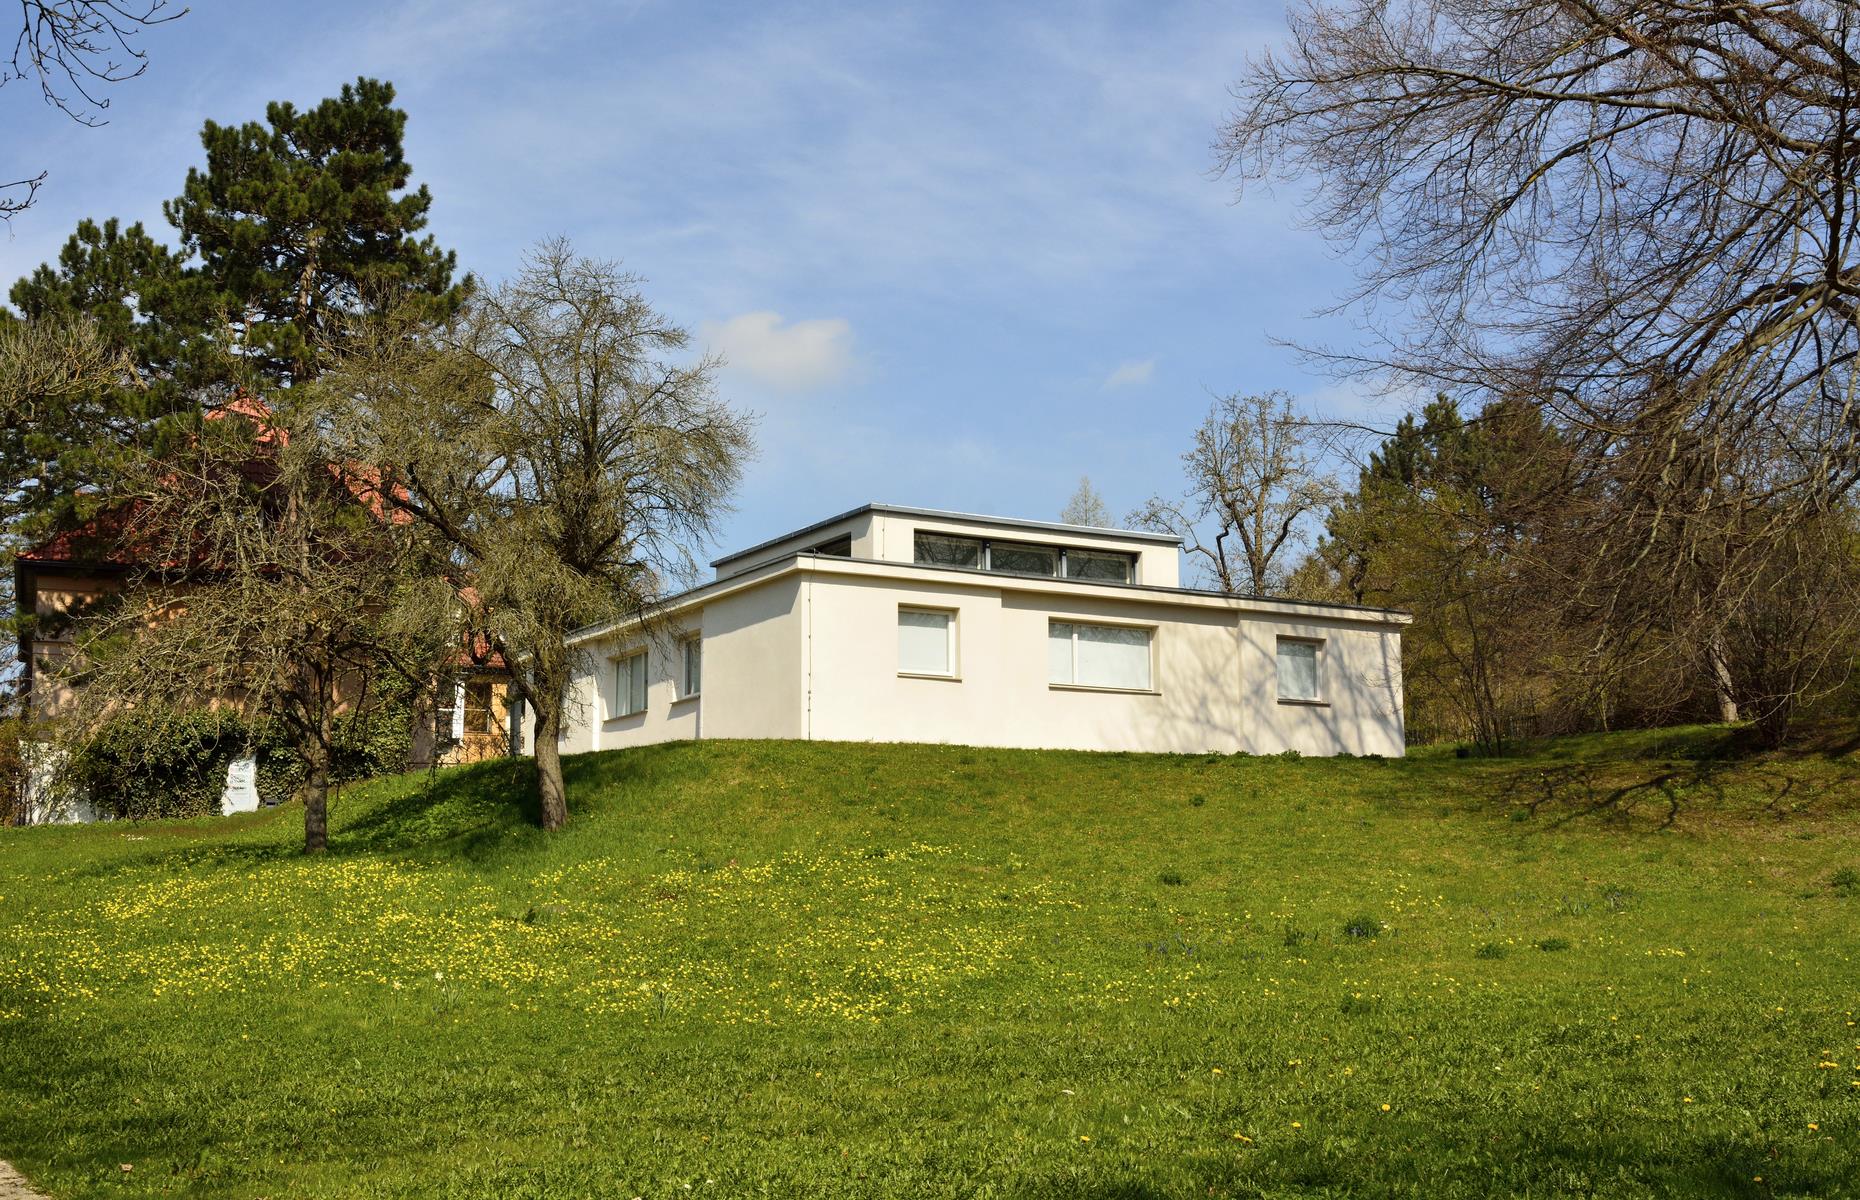 <p>Weimar was <a href="http://whc.unesco.org/en/list/729">the birthplace of Bauhaus</a>, one of the world’s most influential schools of design and architecture – yet its presence here is only discernible in a few remaining structures and <a href="https://www.klassik-stiftung.de/en/bauhaus-museum-weimar/">a museum</a>, which opened in 2019. The controversial avant-garde school moved to Dessau in 1925 and then to Berlin in 1932, and was forced to close completely a year later by the Nazi regime. The 1923-built Haus am Horn, an experimental residential house in a striking, steel and concrete cubic design, is the only Bauhaus-designed building in the city.</p>  <p><a href="https://www.loveexploring.com/guides/80368/explore-berlin-the-top-things-to-do-where-to-stay-what-to-eat"><strong>Here's our guide on what to do and where to stay in Berlin</strong></a></p>